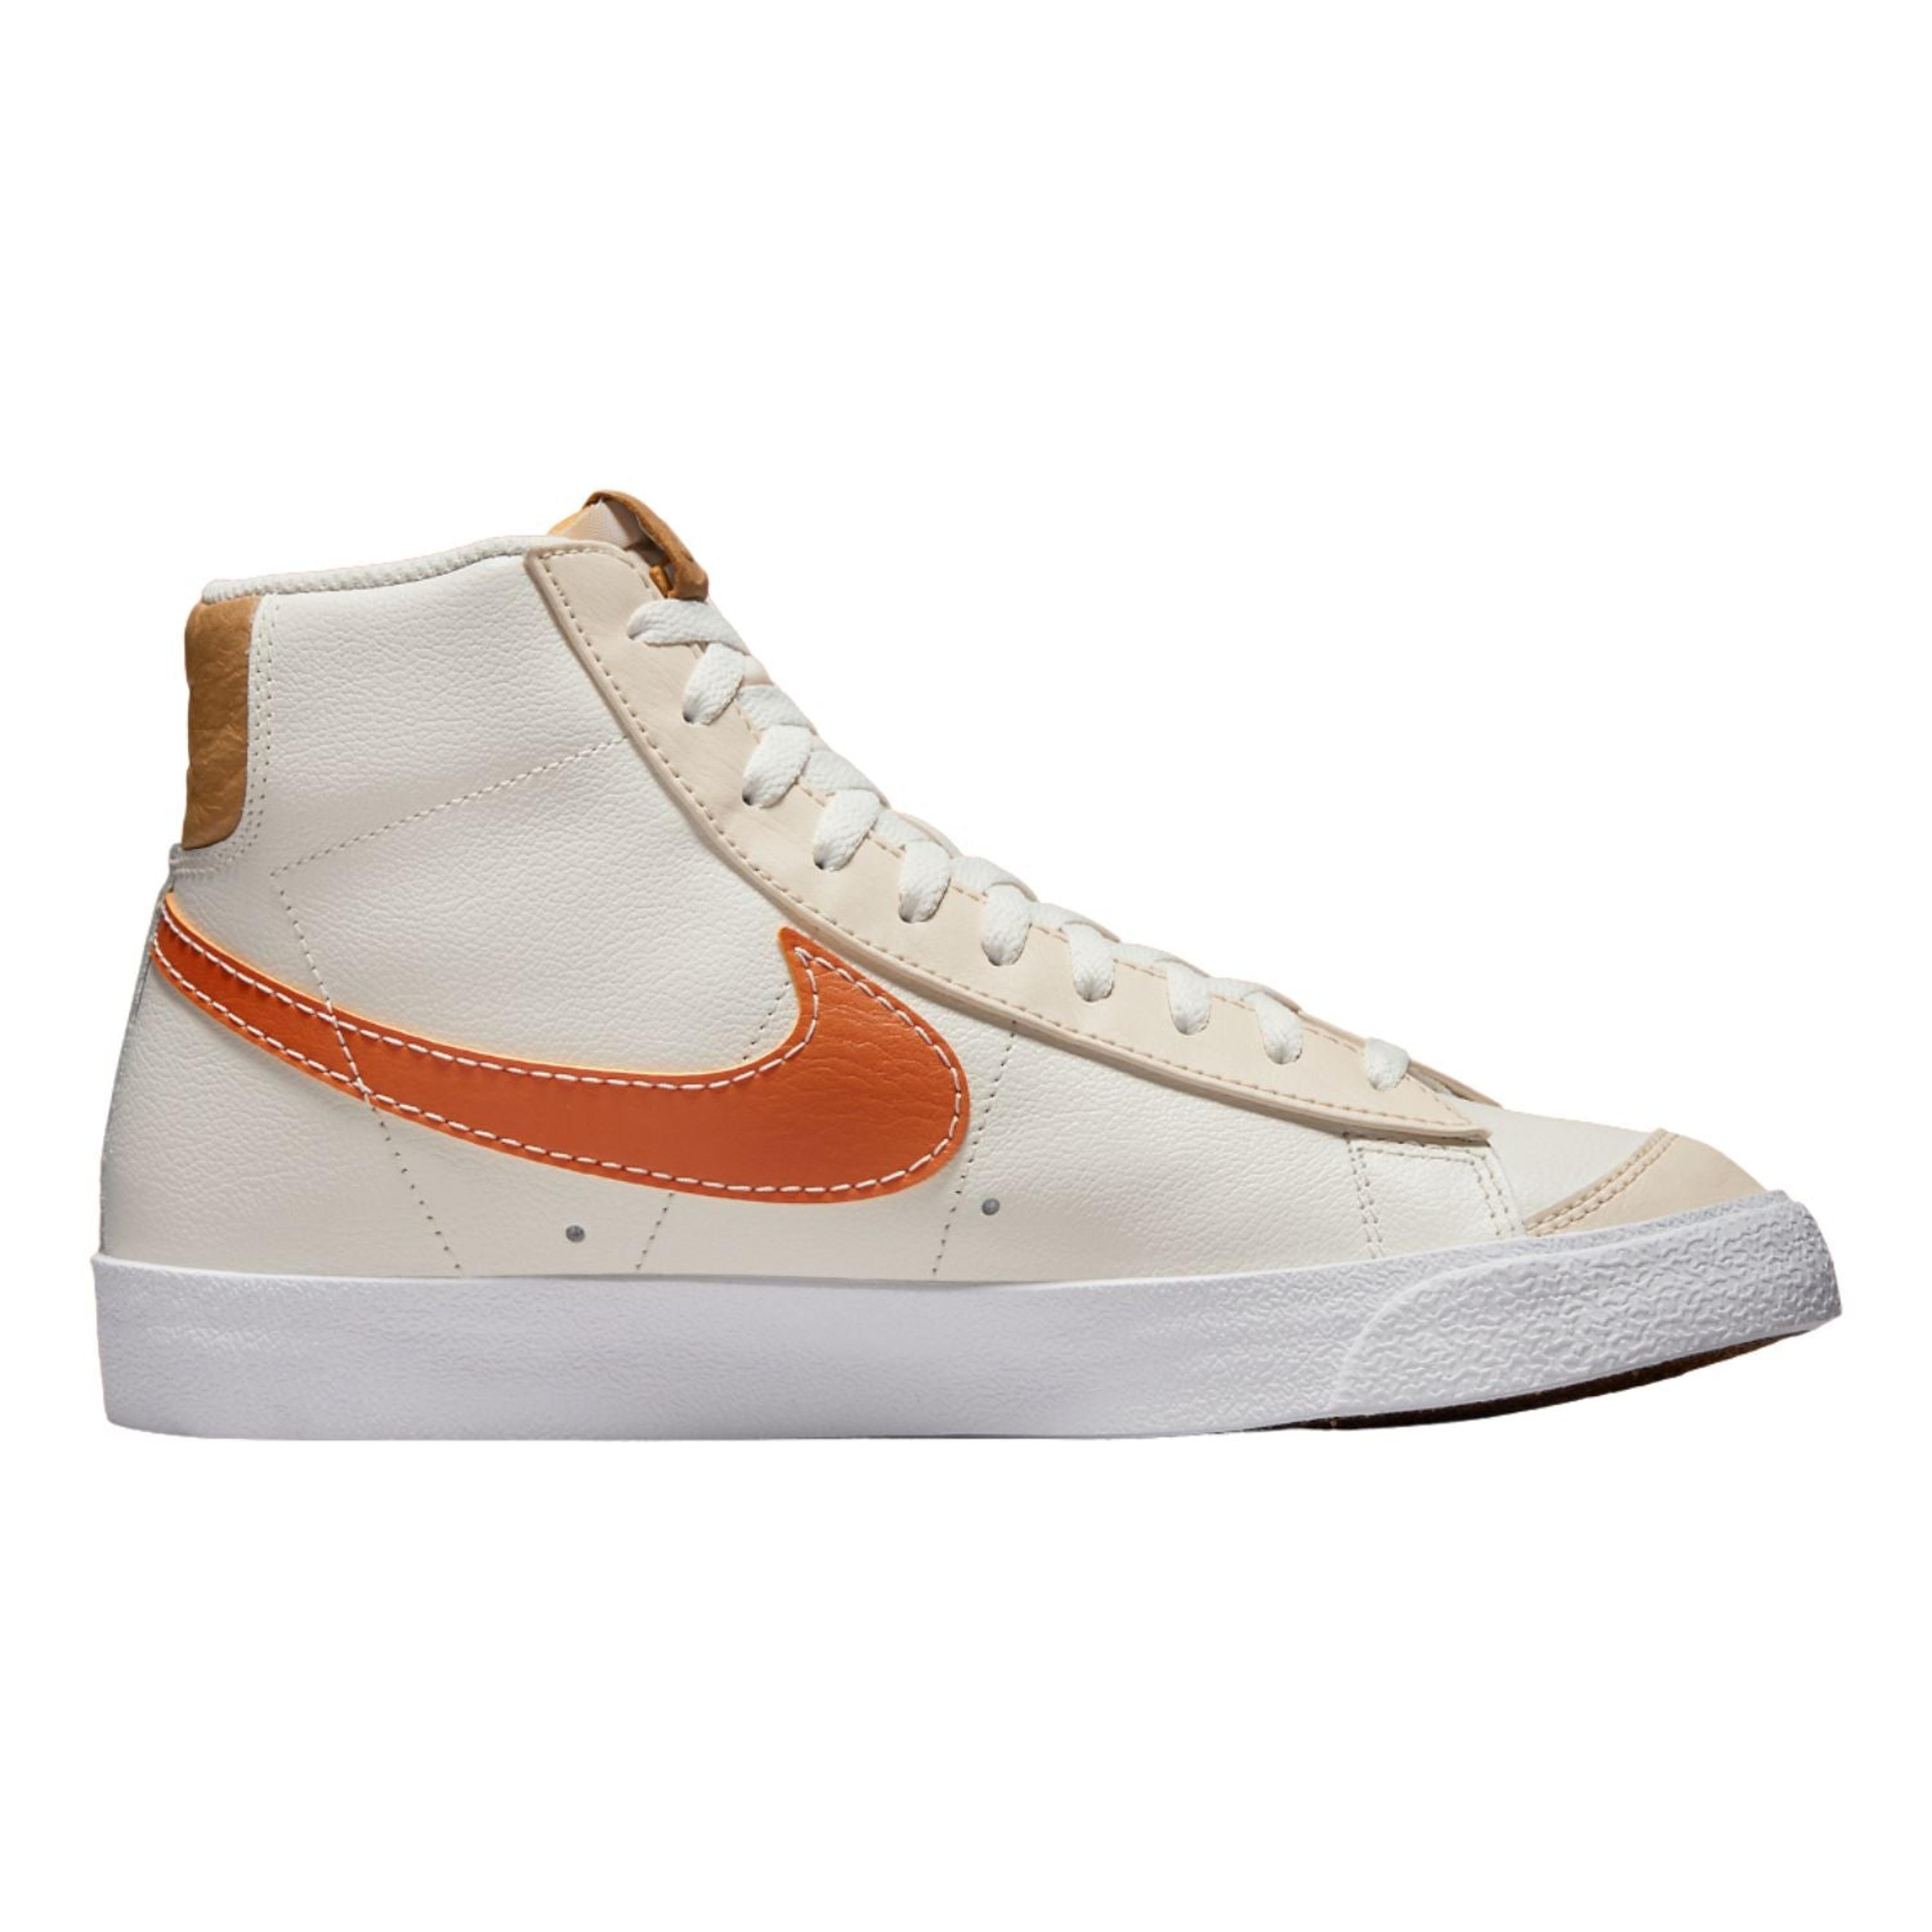 Alternate View 2 of Nike Blazer Mid '77 EMB Inspected By Swoosh Hot Curry